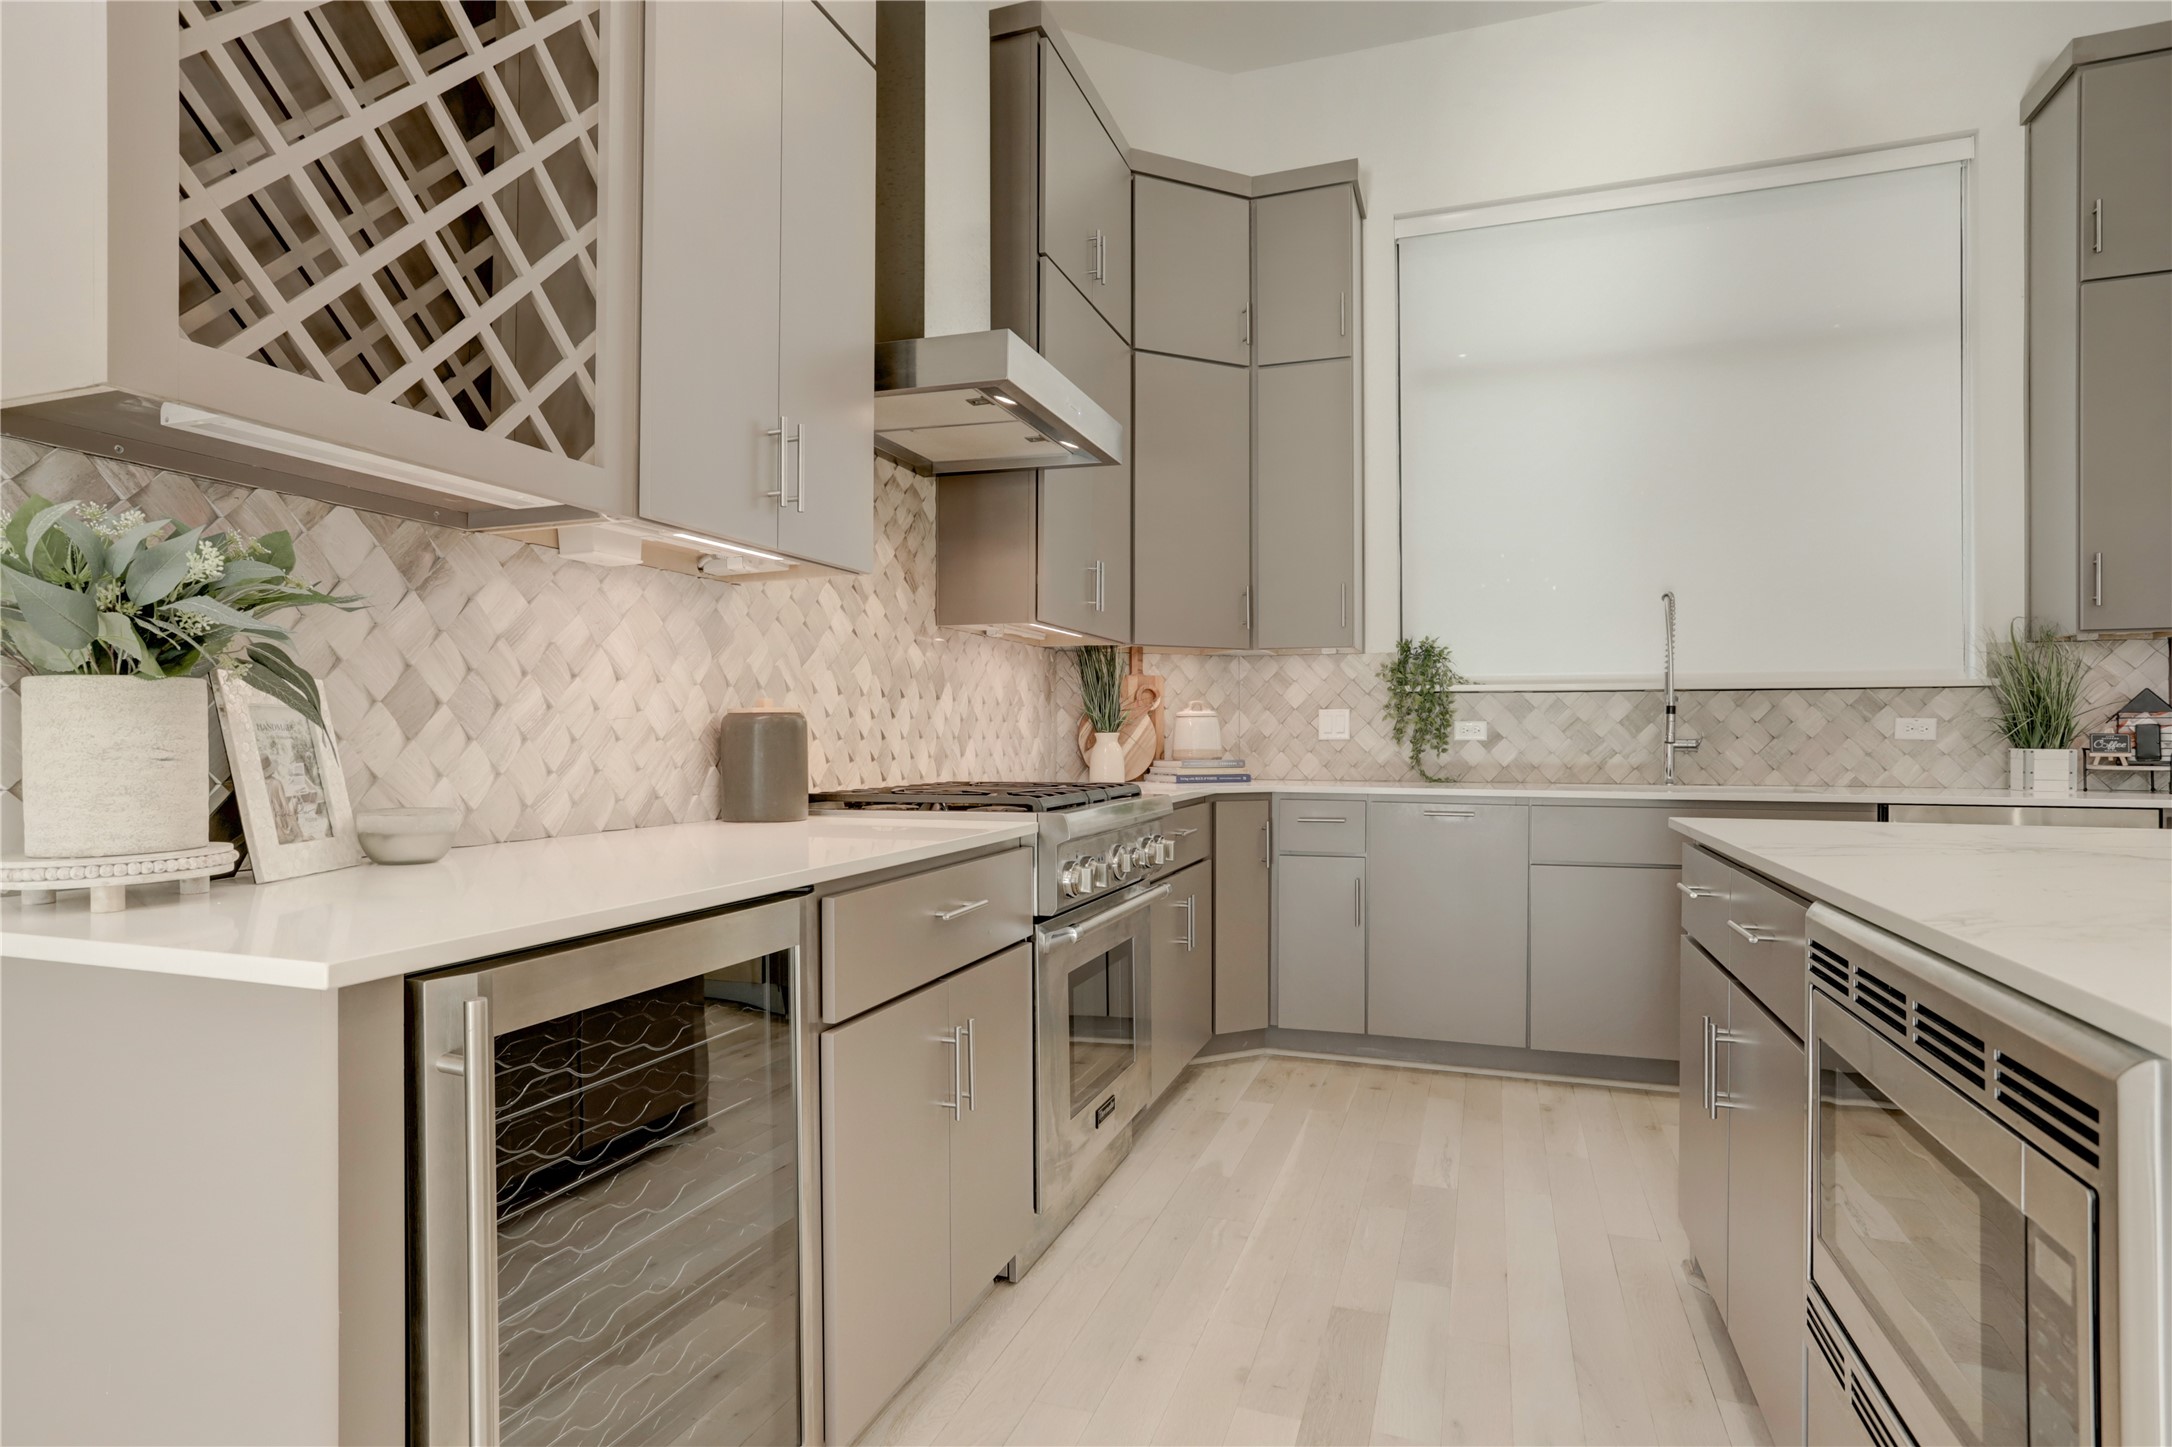 Custom wine storage and refrigerator, adds a touch of sophistication, turning your kitchen into a space for both culinary creations and wine connoisseurship.